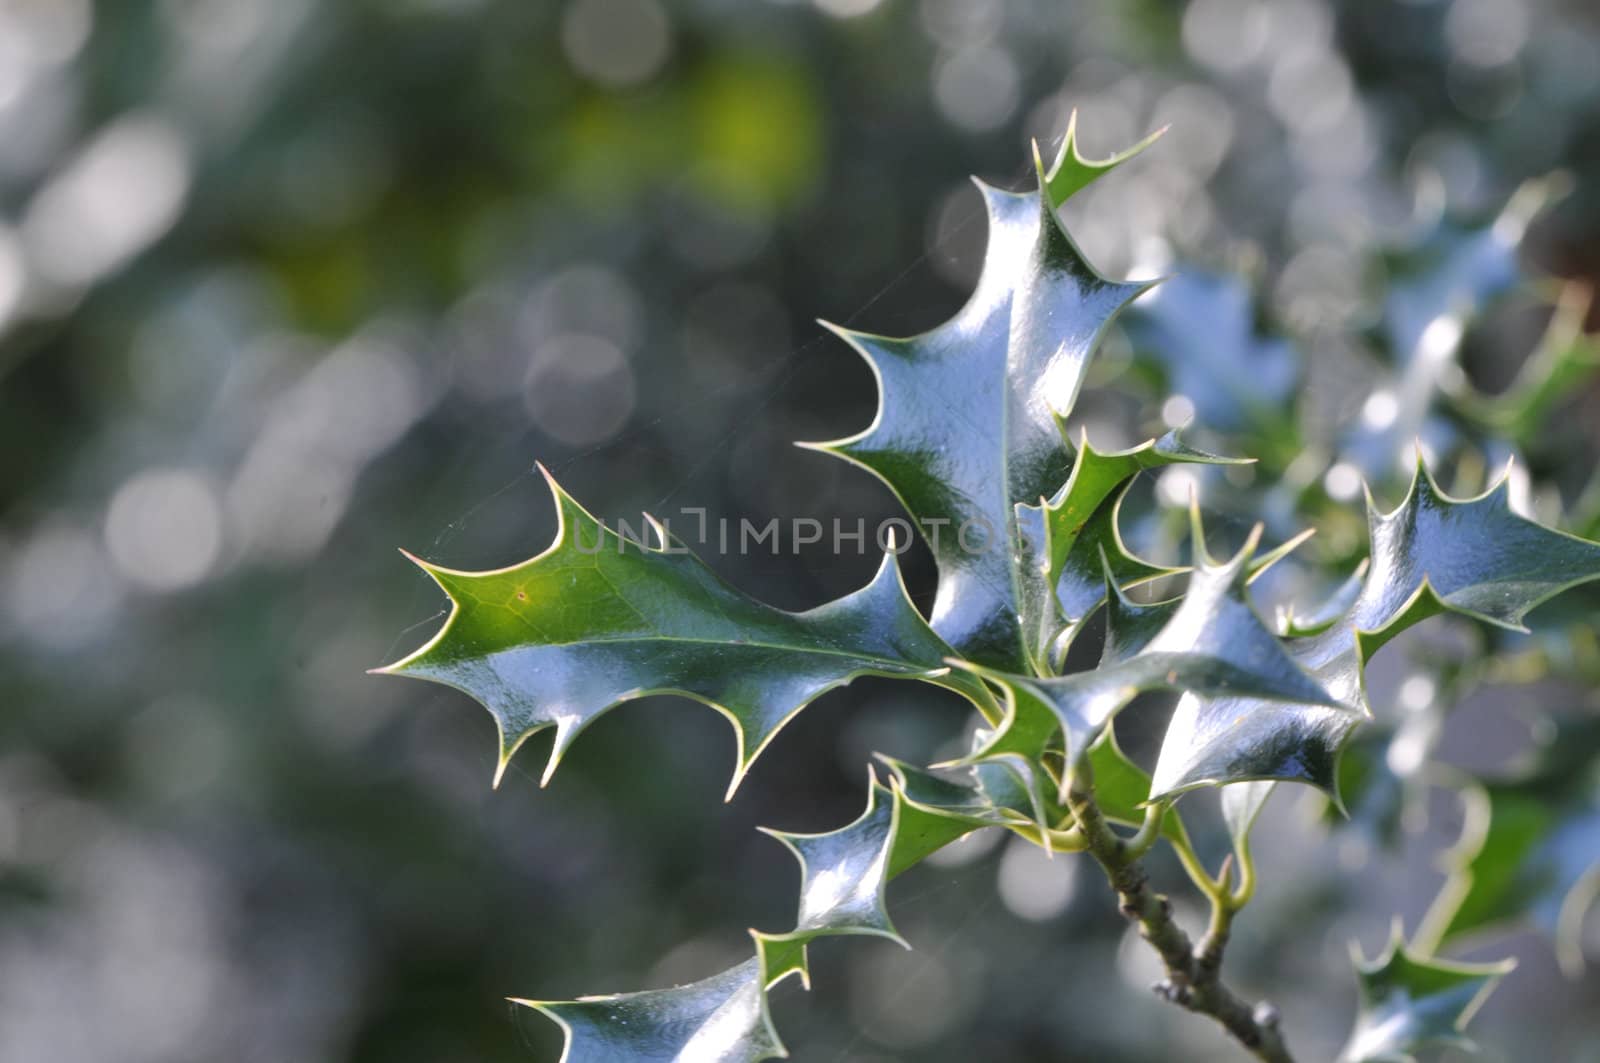 Green Holly Leafs with a blurred background by shkyo30